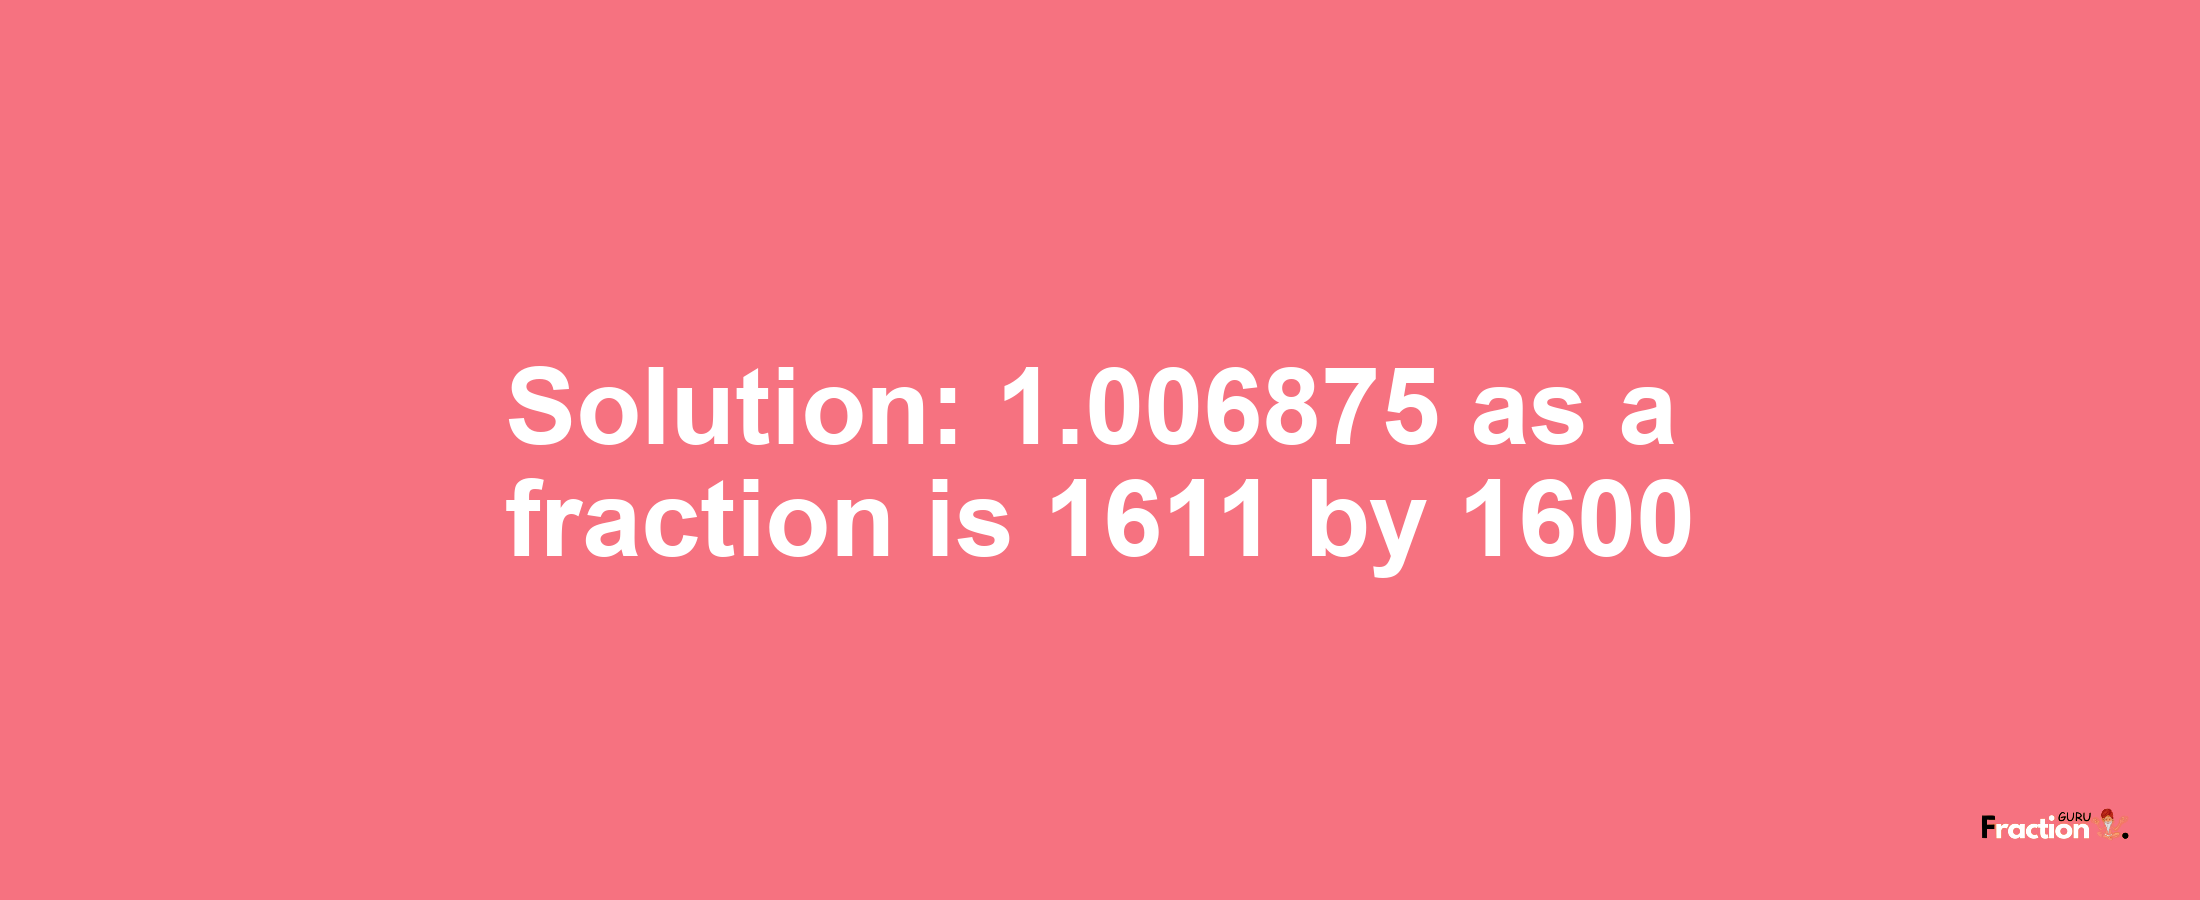 Solution:1.006875 as a fraction is 1611/1600